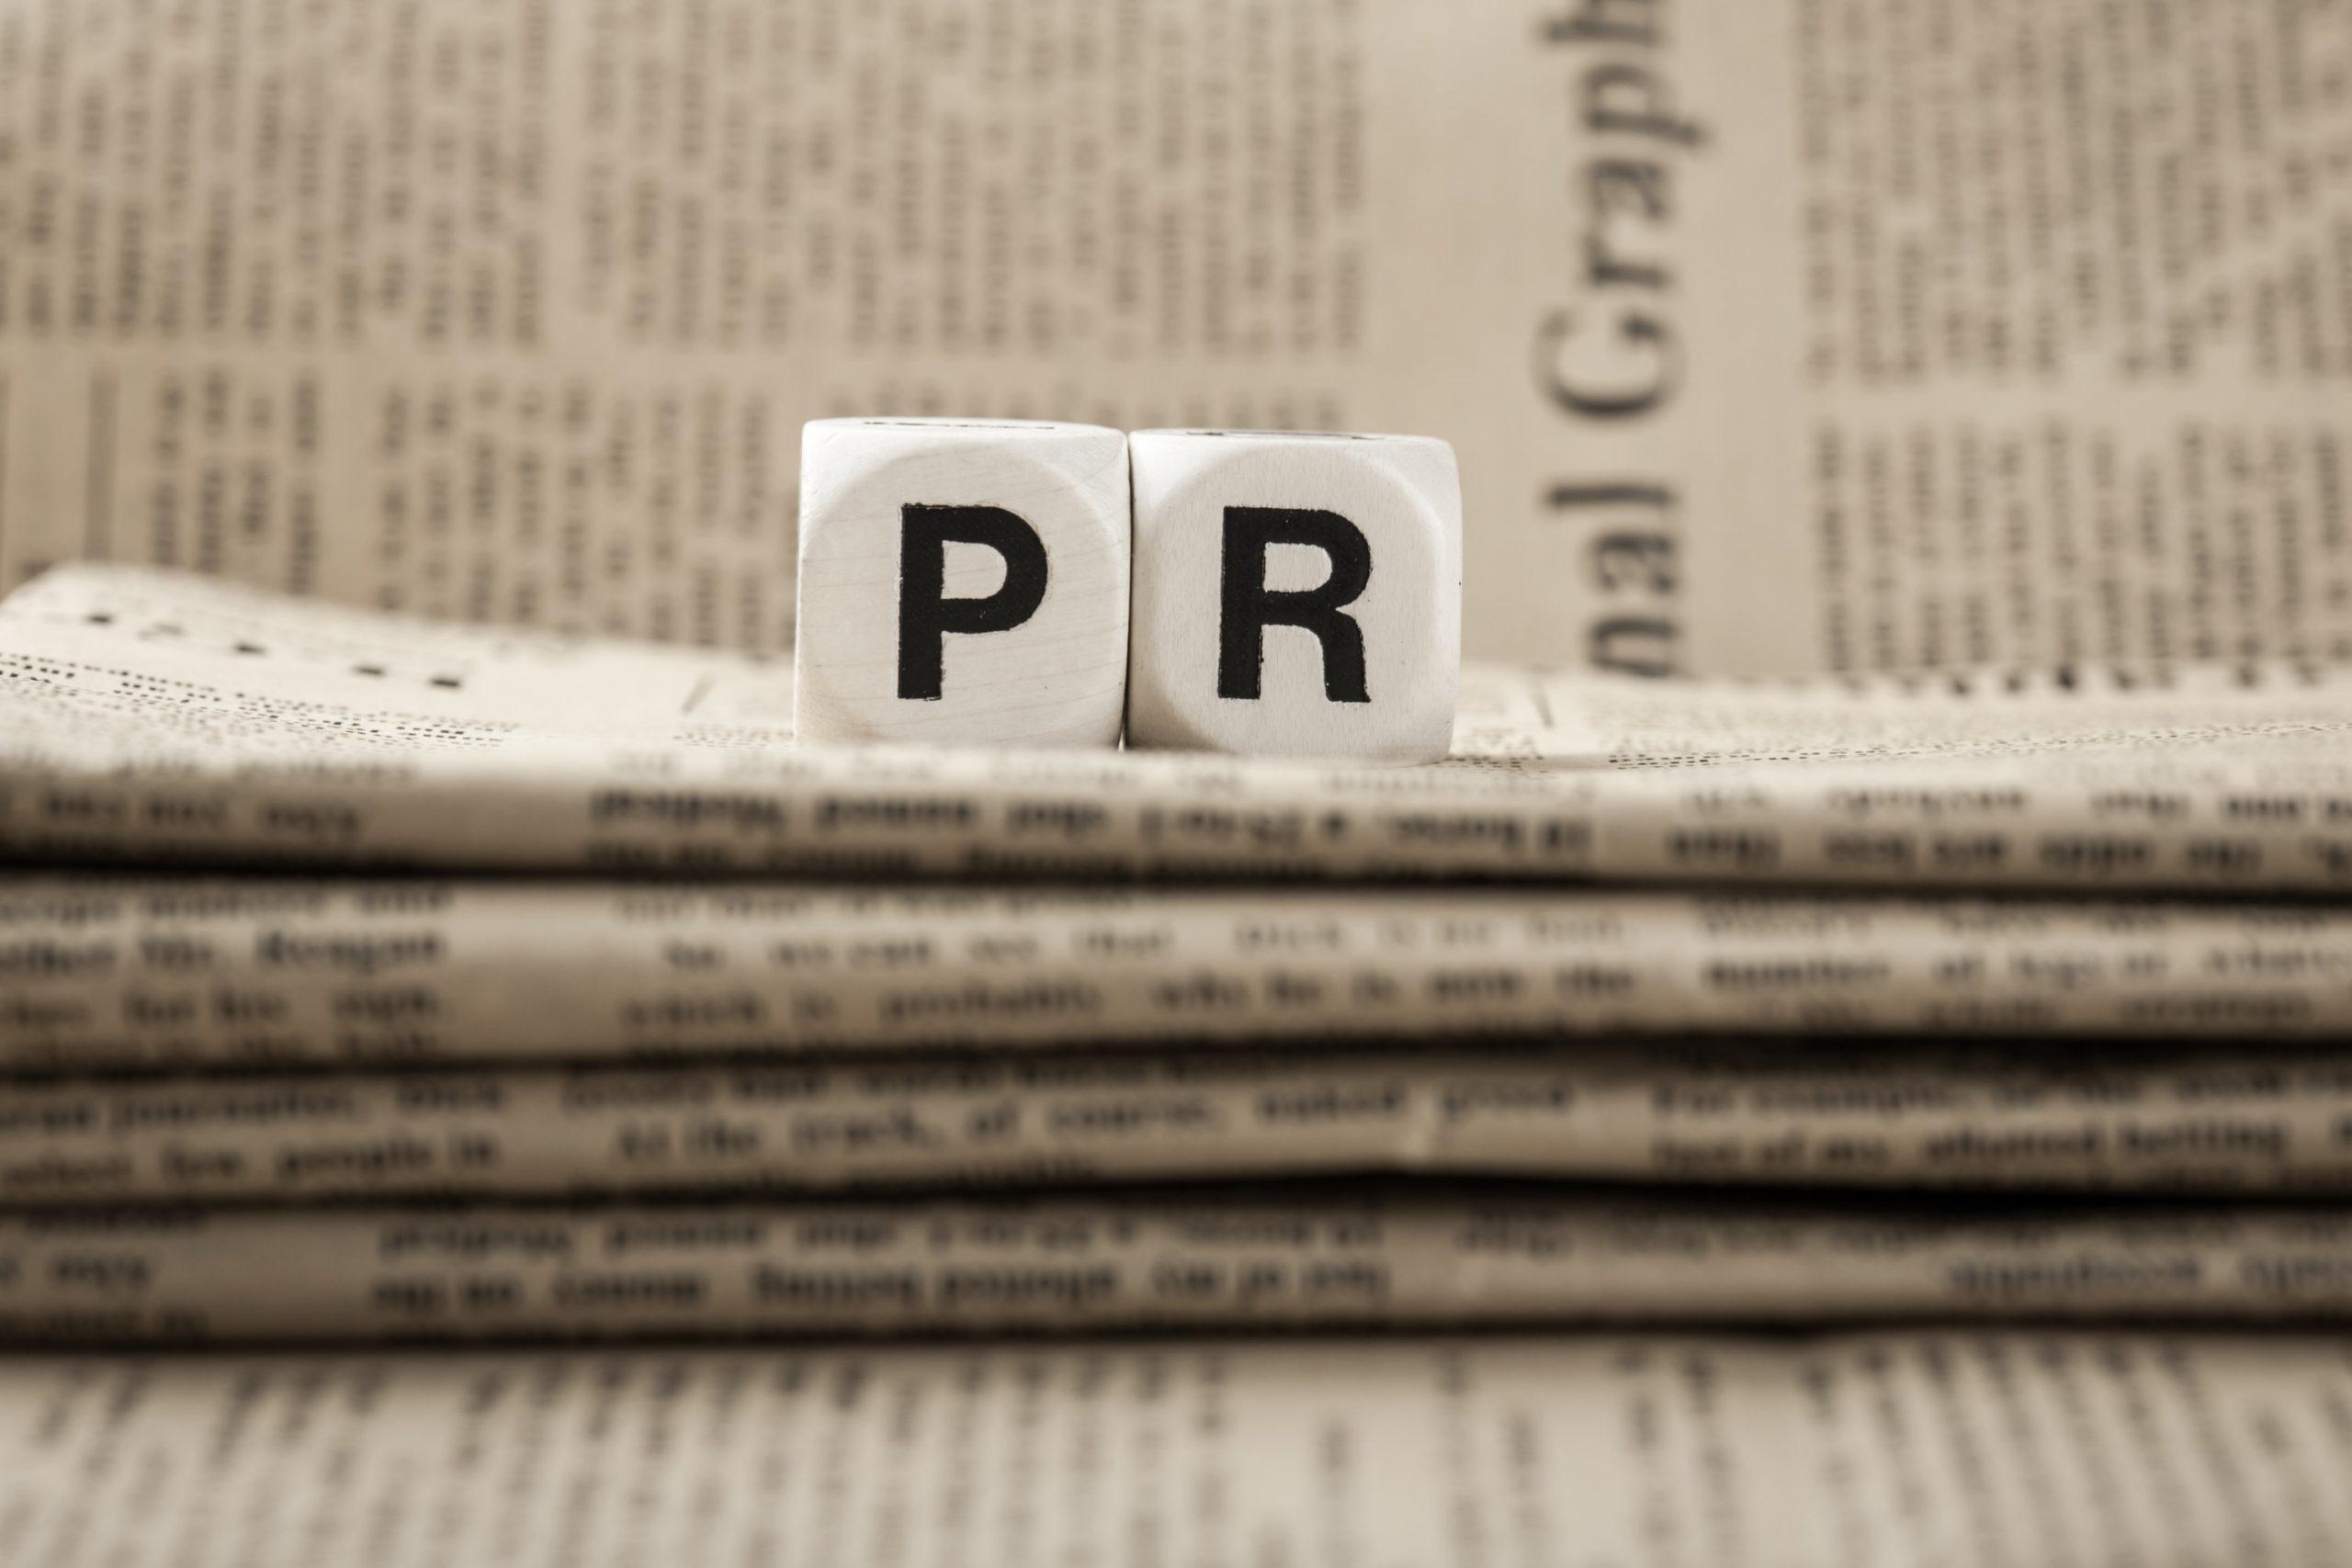 Abbreviation,Pr,On,Newspapers,Background